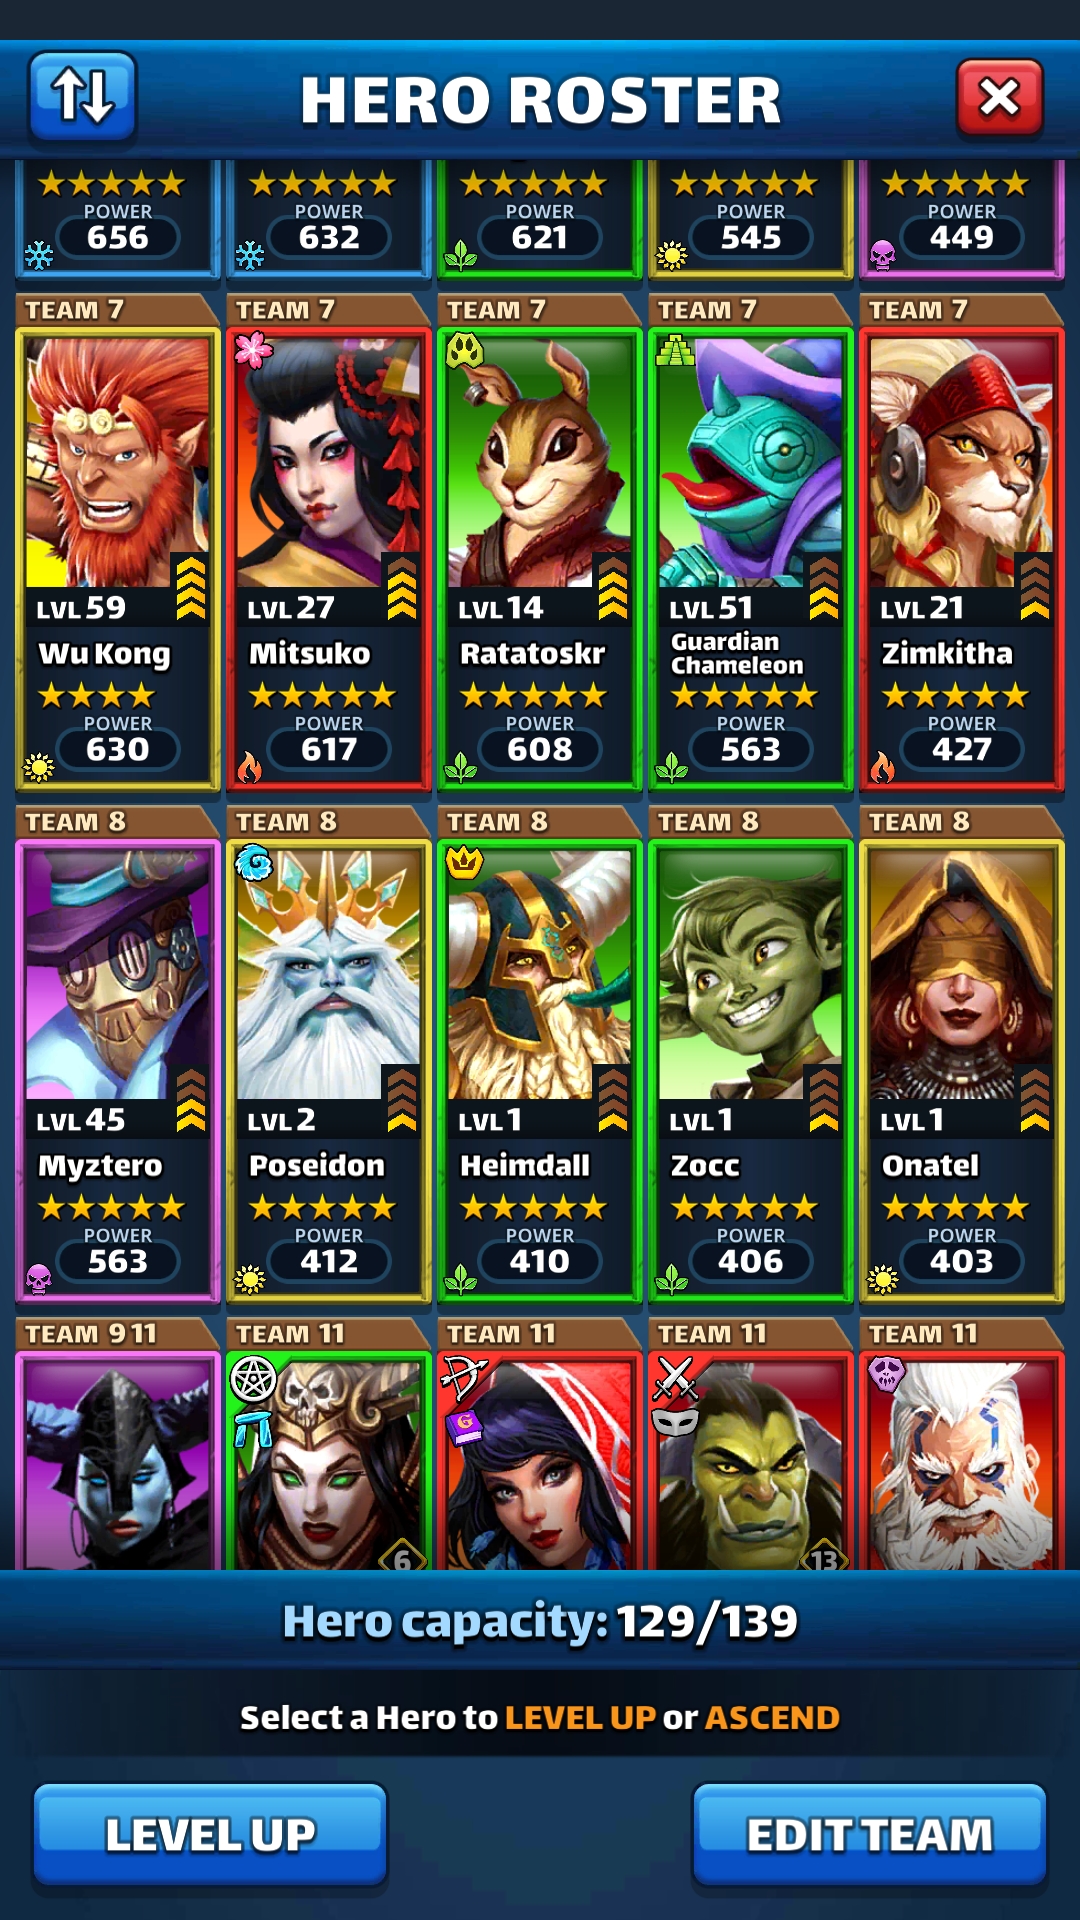 Selling Vip Account Level 62 Max 4542 Team Power - 69 5s And Much More Epicnpc Marketplace